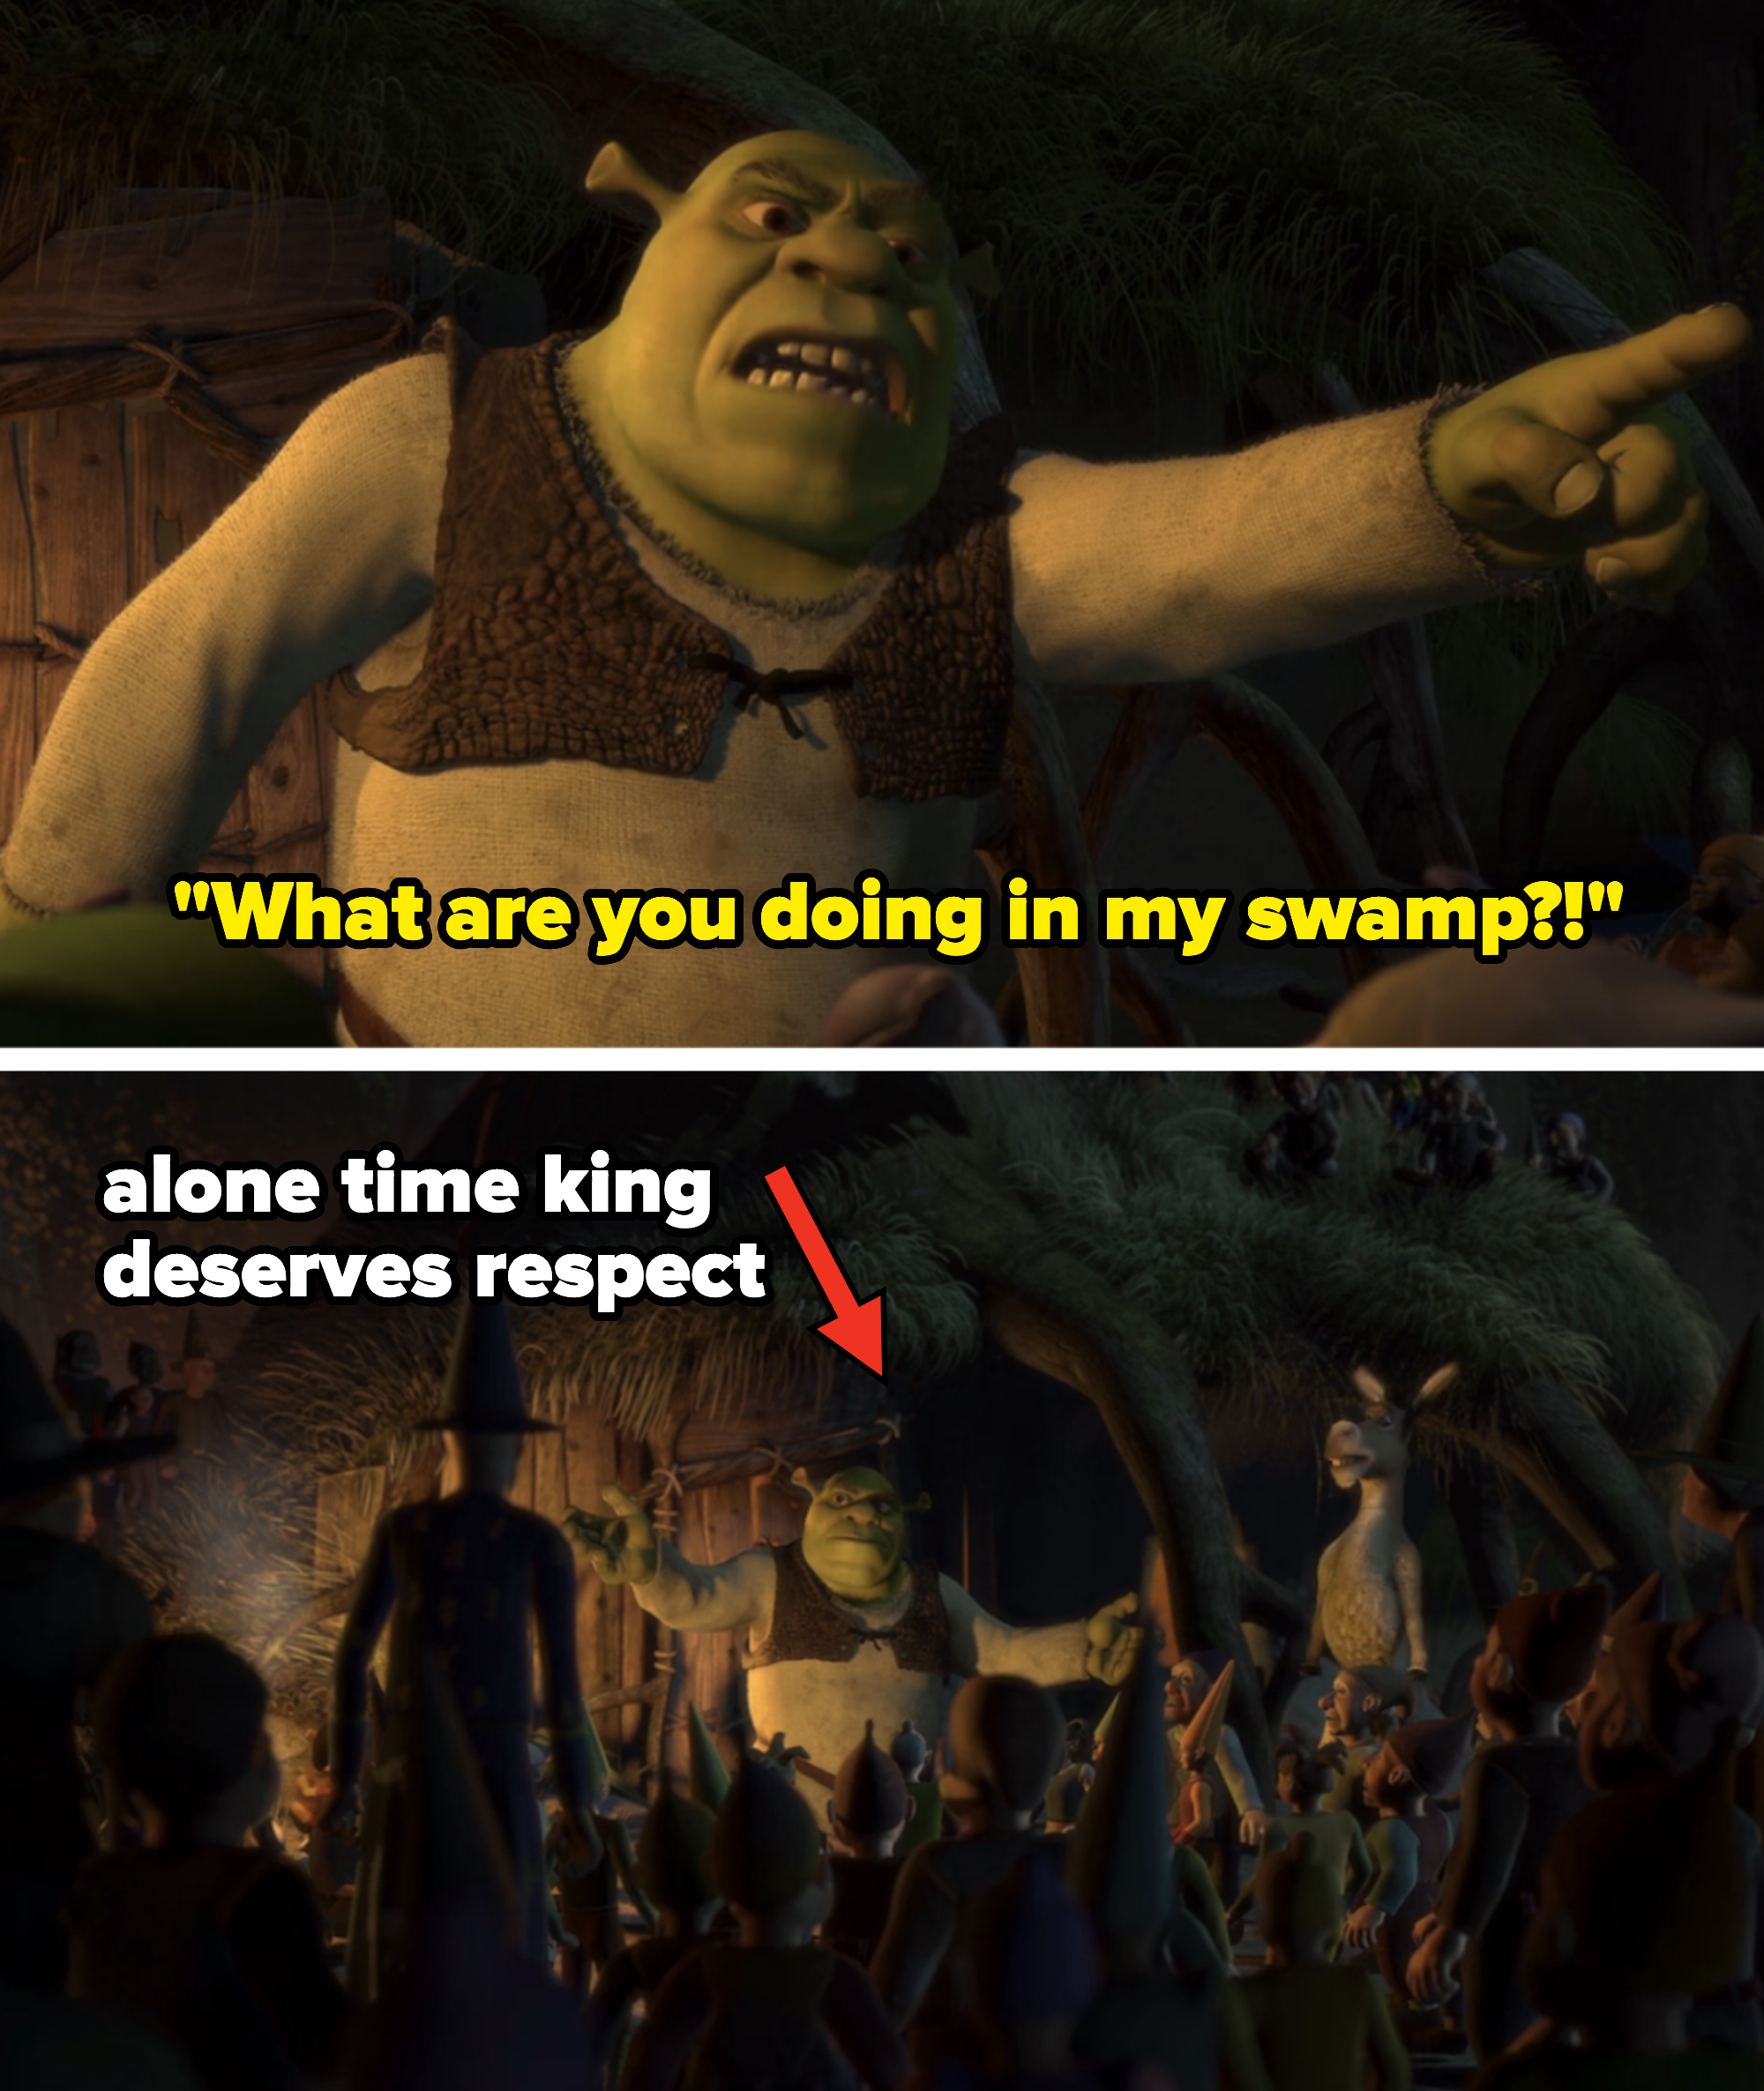 shrek asking what a crowd is doing in his swamp